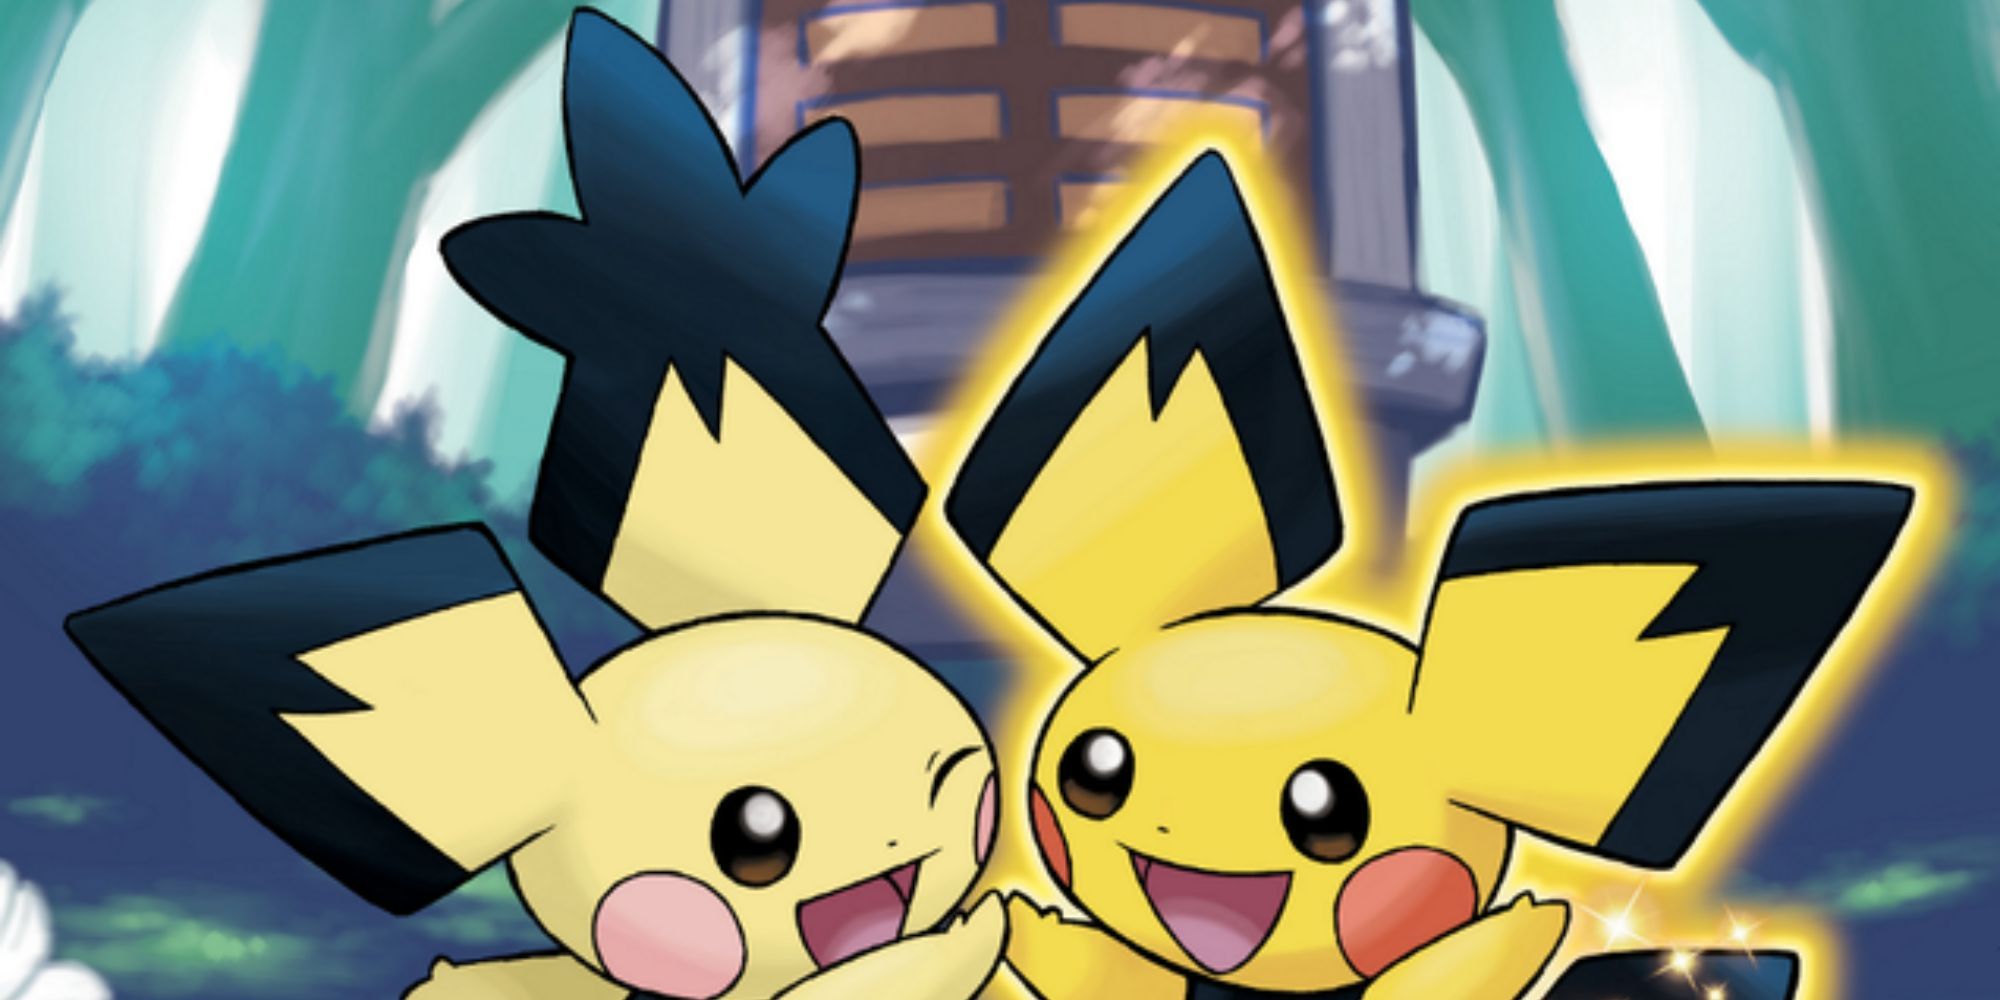 Official art of the Spiky-Eared Pichu and the Pikachu-colored Pichu at Ilex Forest.